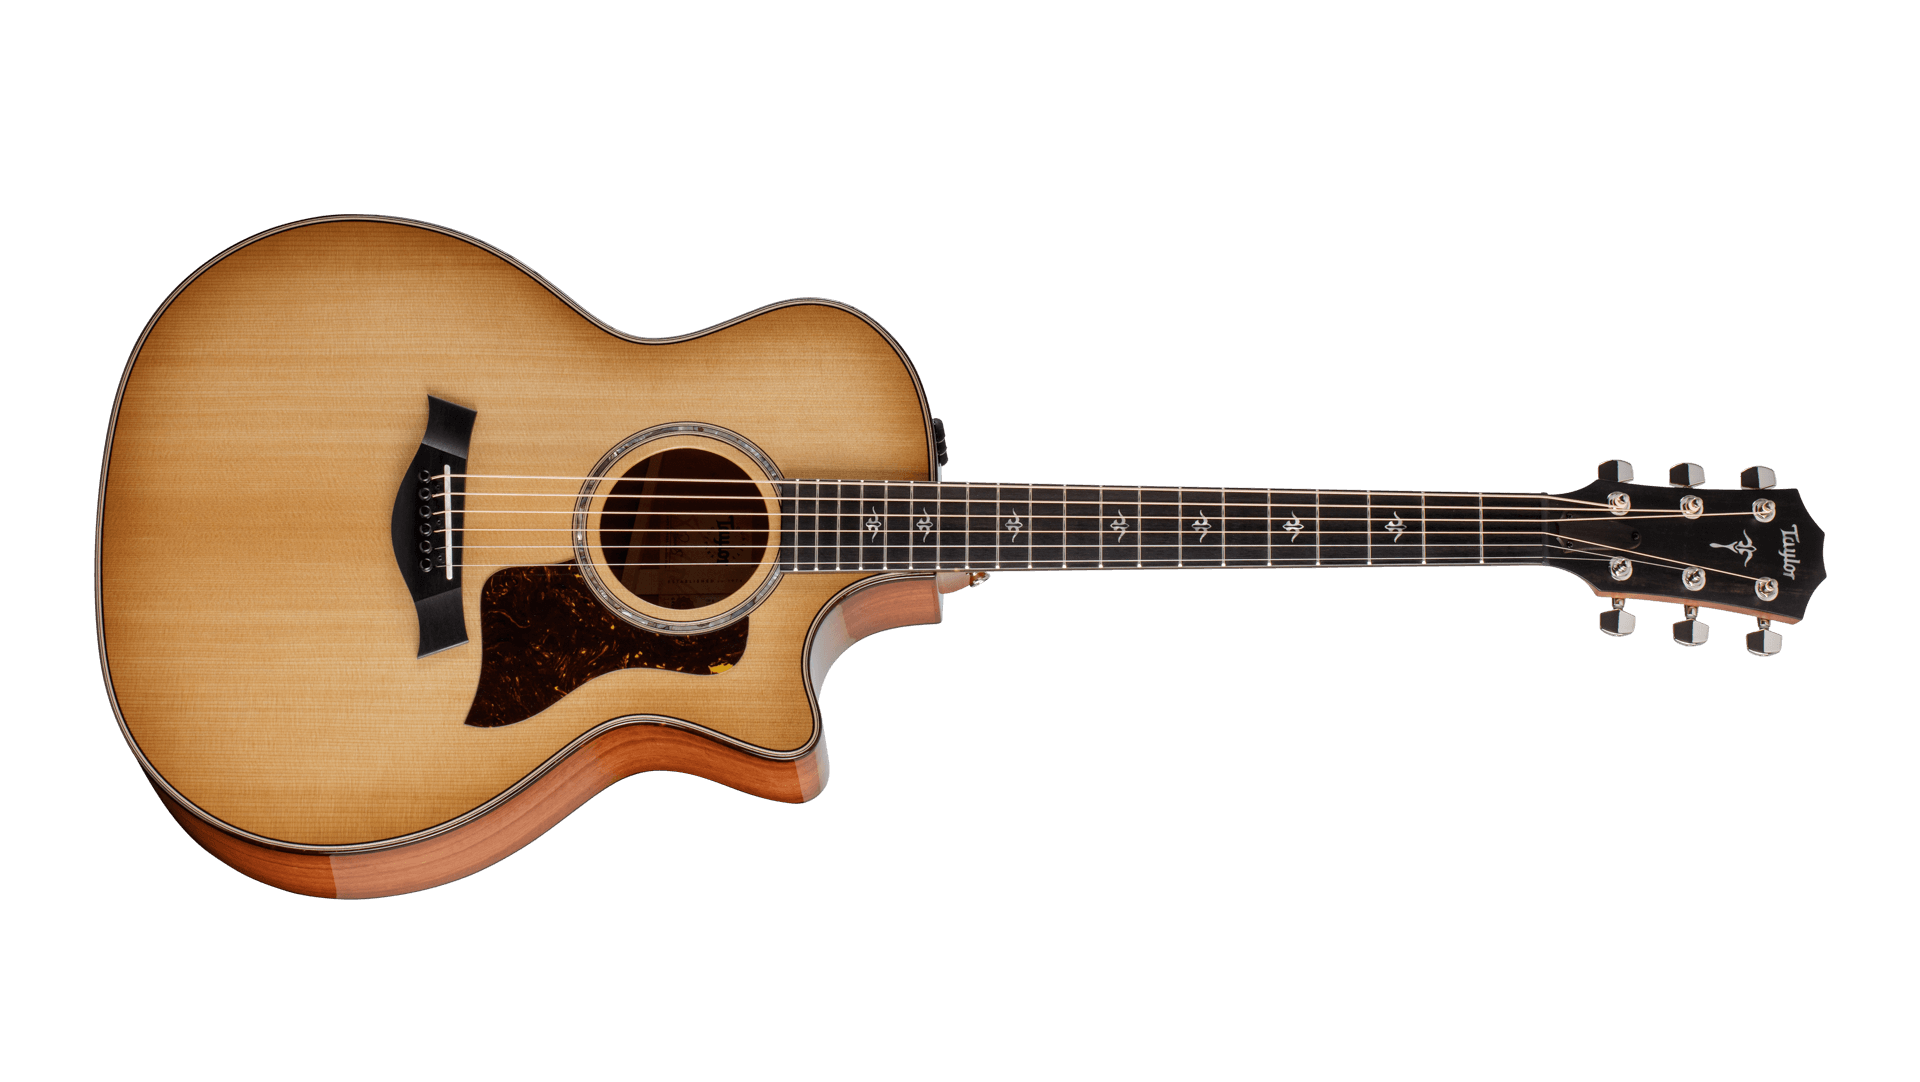 Review: Taylor 514ce Urban Red Ironbark Acoustic Guitar